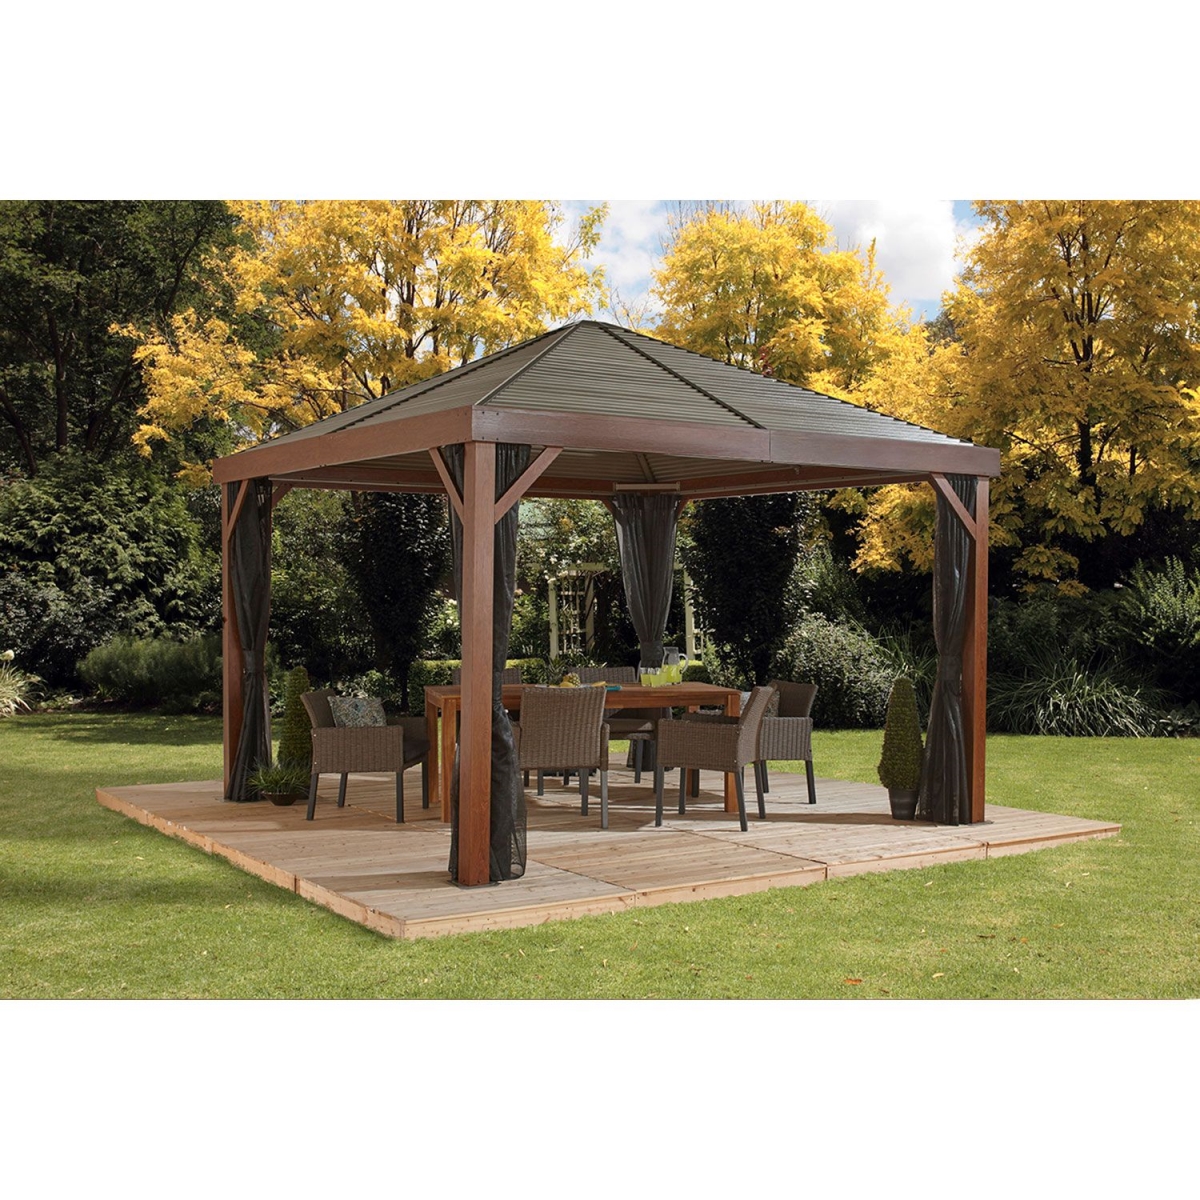 Sojag 500-8162790 12 X 12 In. South Beach Wood Effect Sun Shelter - Steel